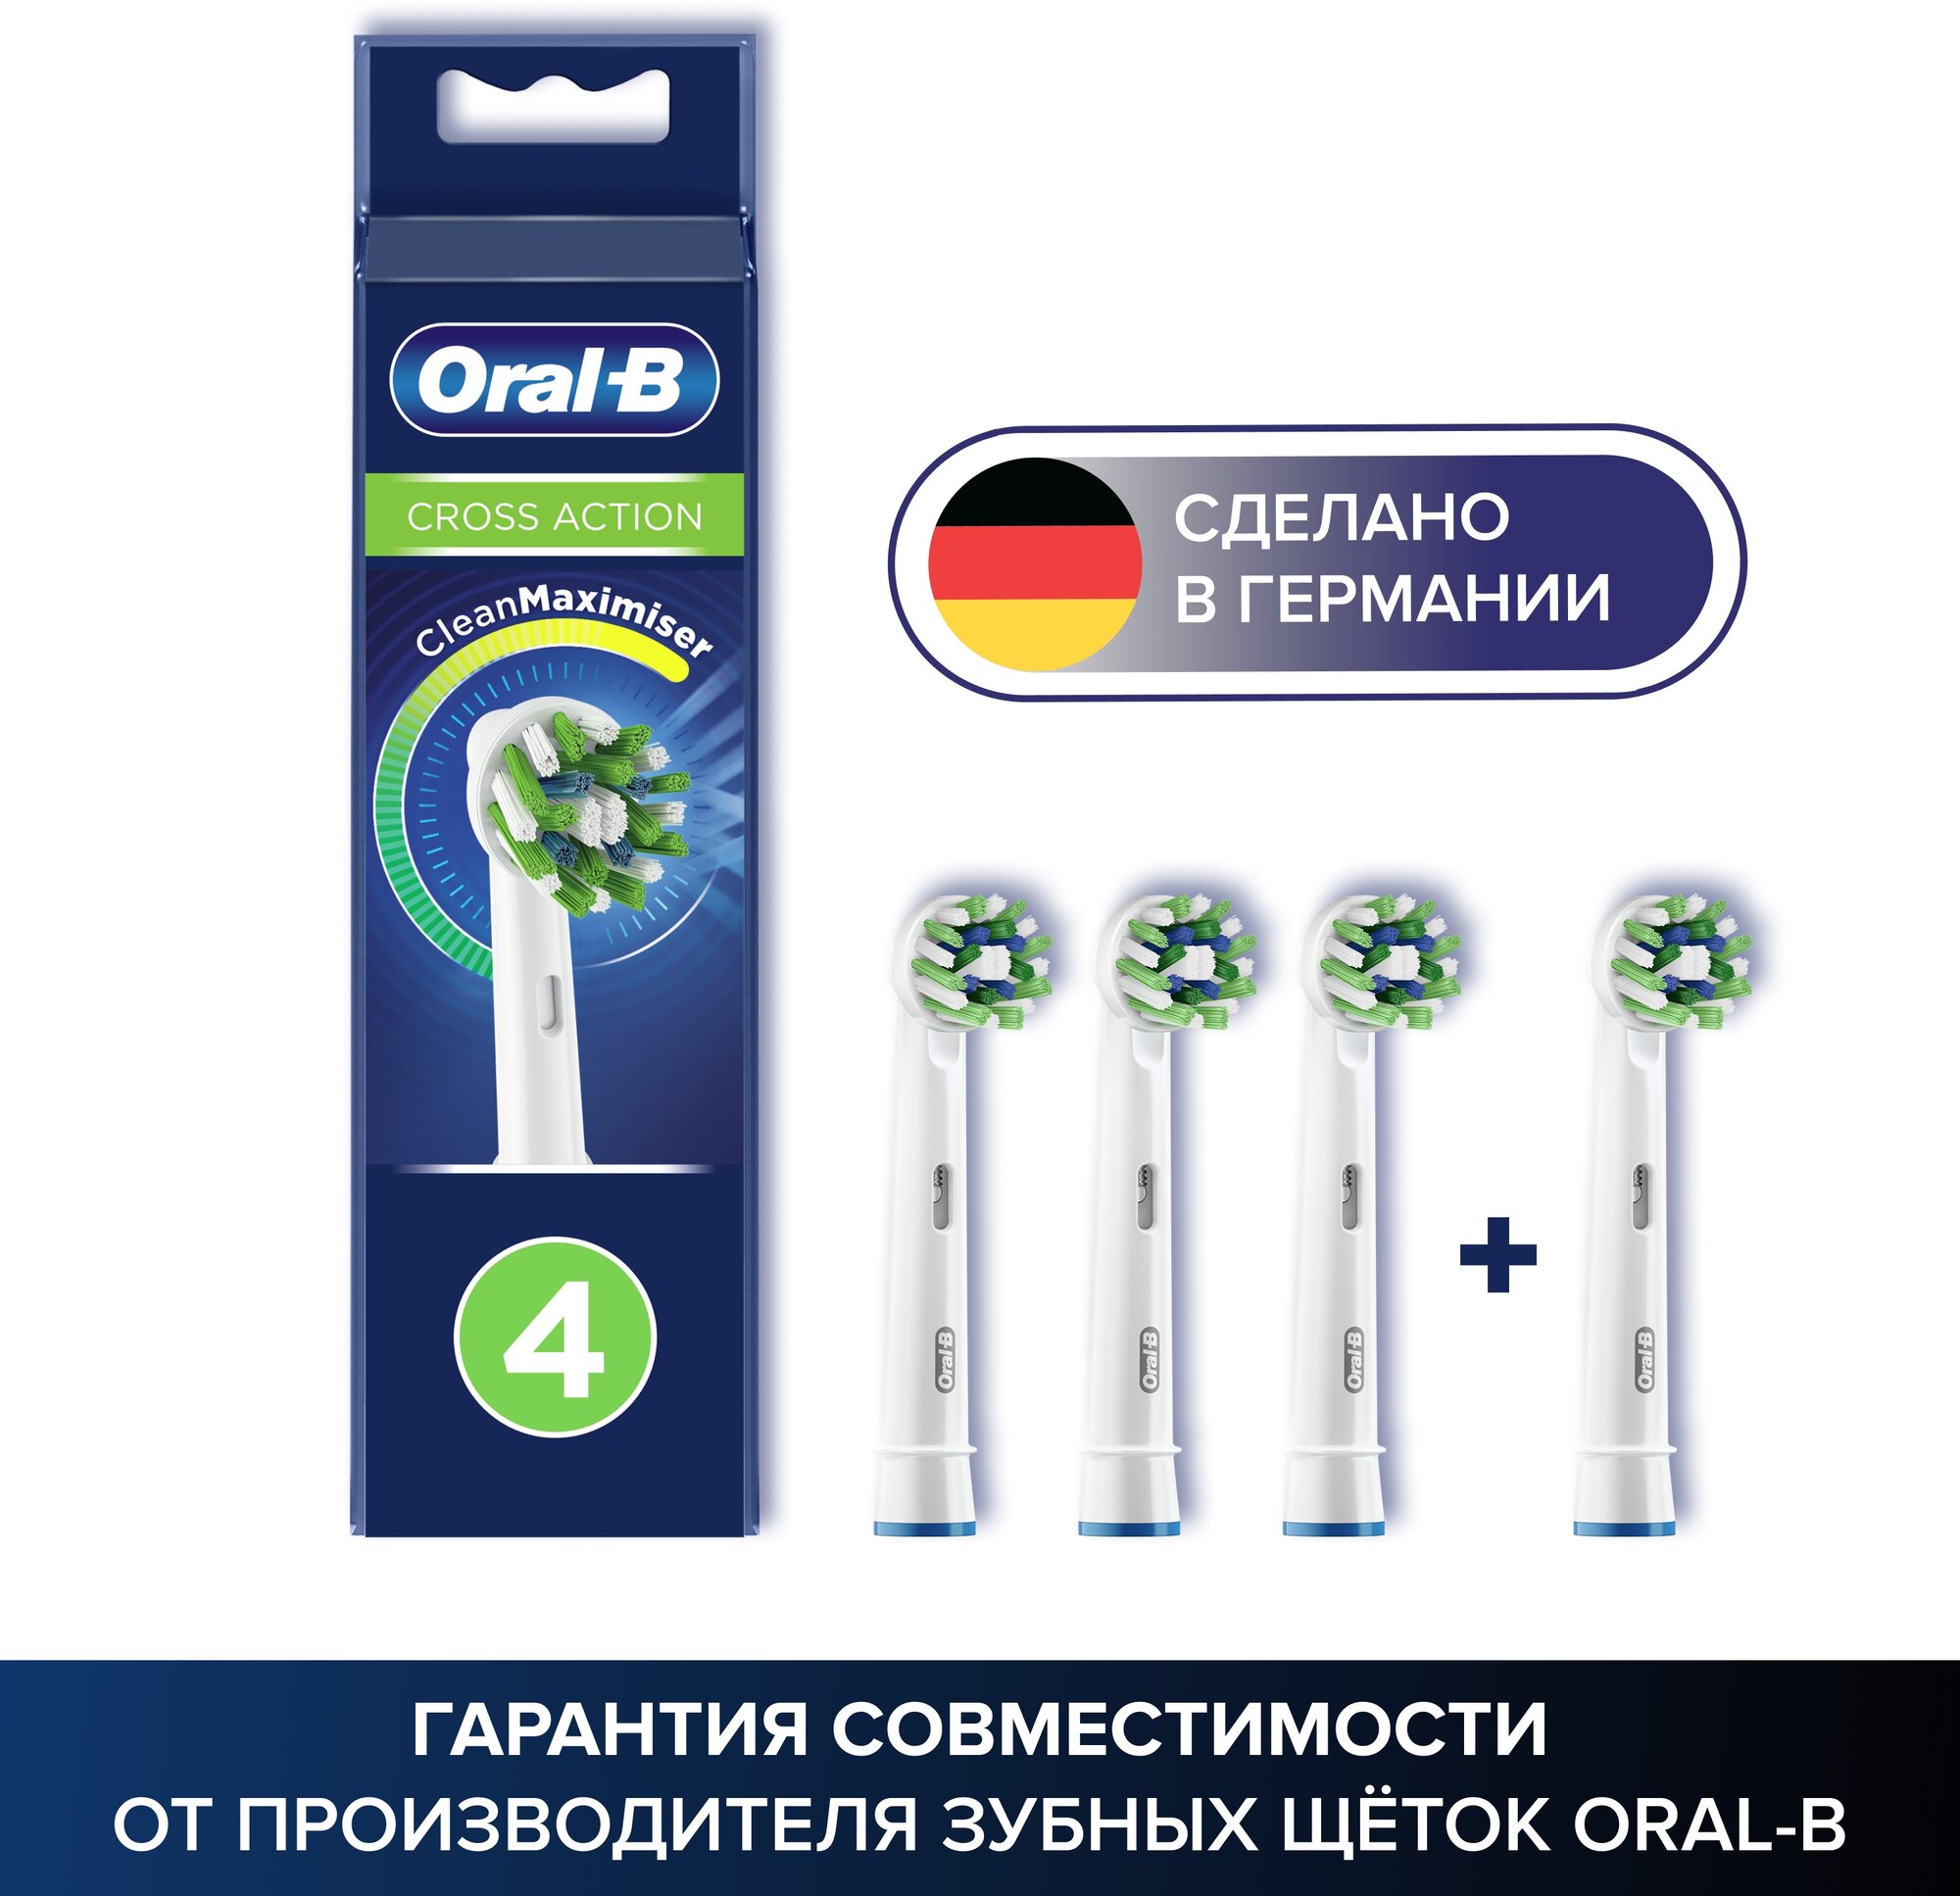   Oral-B Cross Action CleanMaximiser     , , 4 .